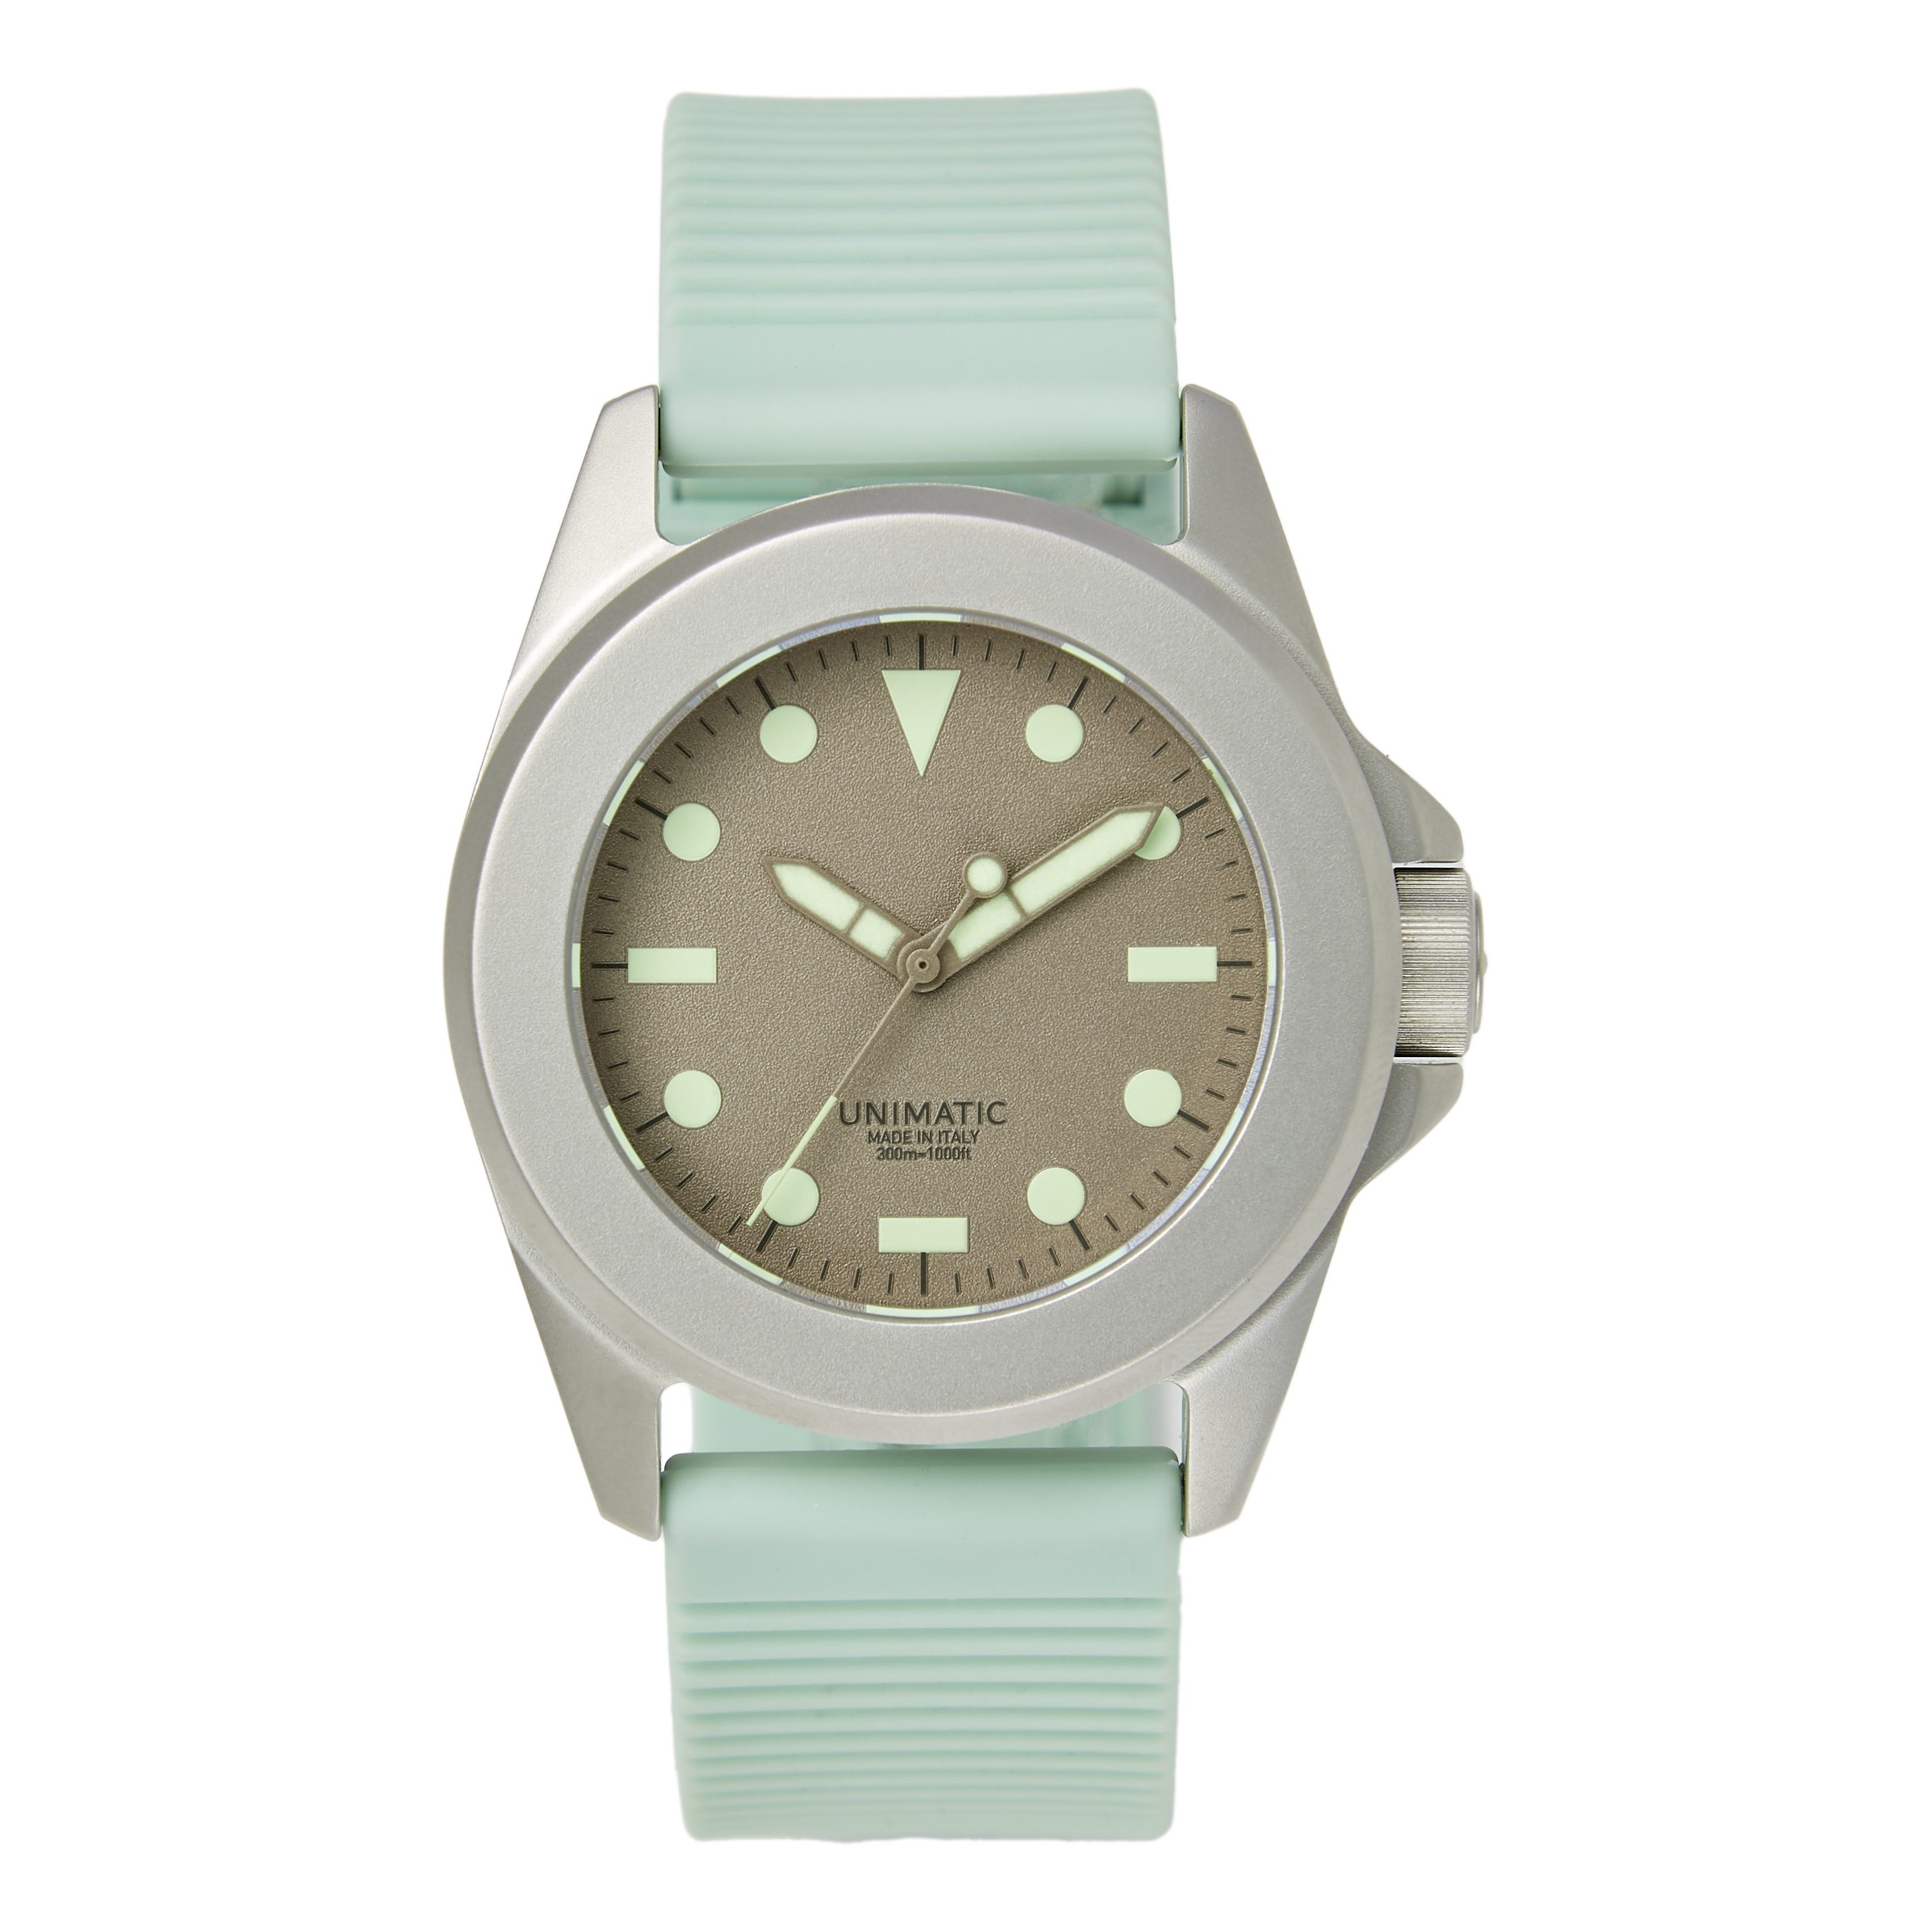 unimatic Watches for Men - Shop Now on FARFETCH